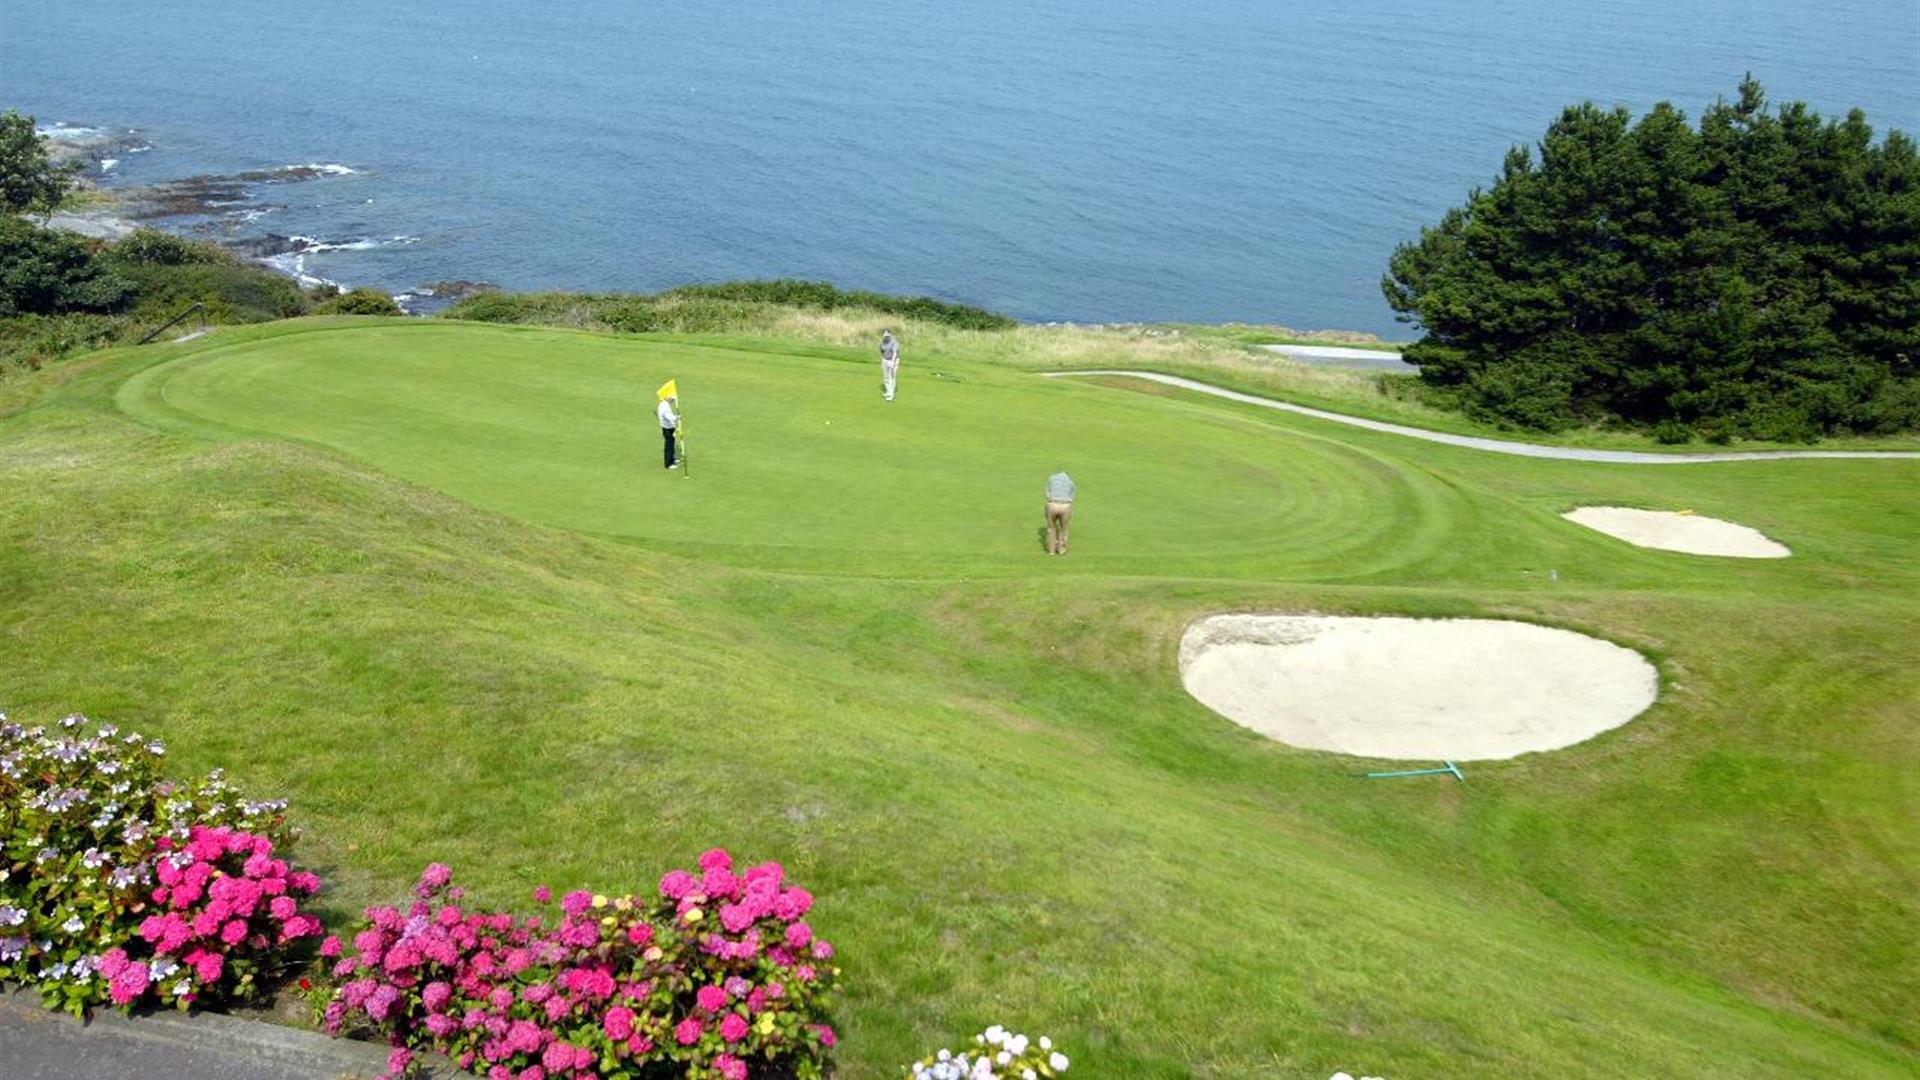 Photo of golfers in play on the green with waters of Belfast Lough in background